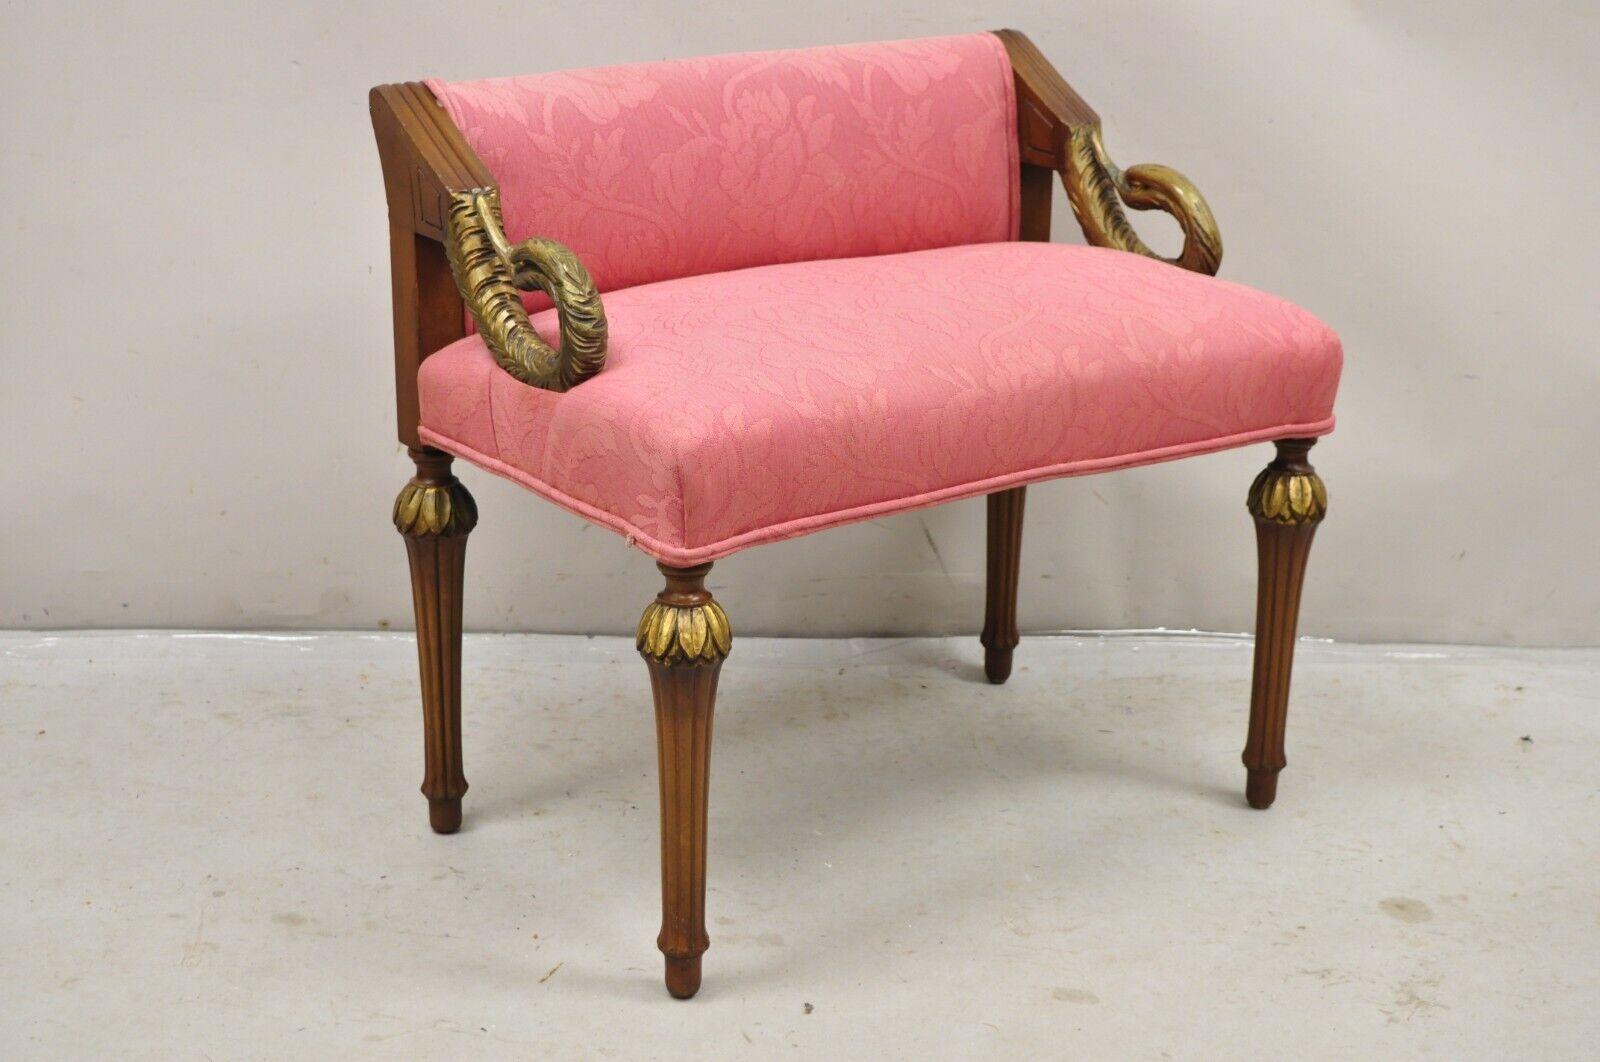 Vintage French Louis XVI Style Pink Vanity Chair Bench Seat w/ Swan Carved Arms. Circa Early 20th Century. Measurements: 26